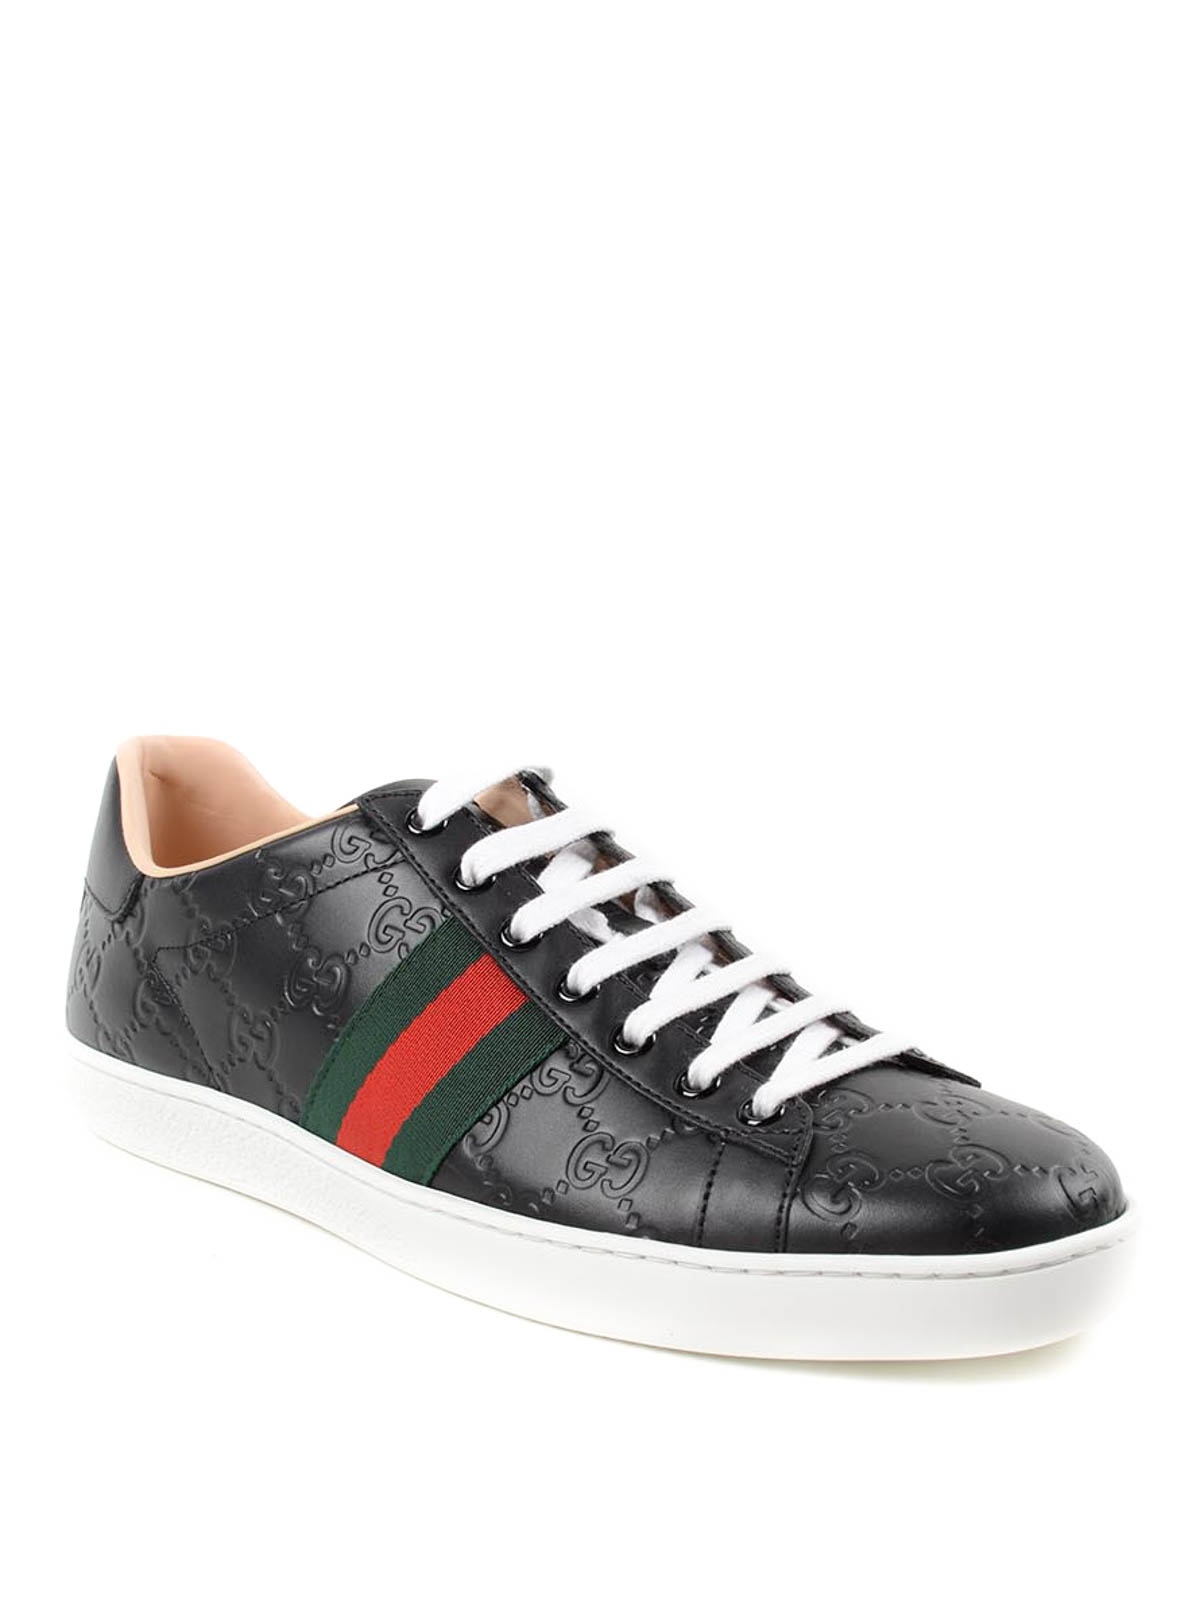 GG leather sneakers by Gucci - trainers | Shop online at iKRIX.com